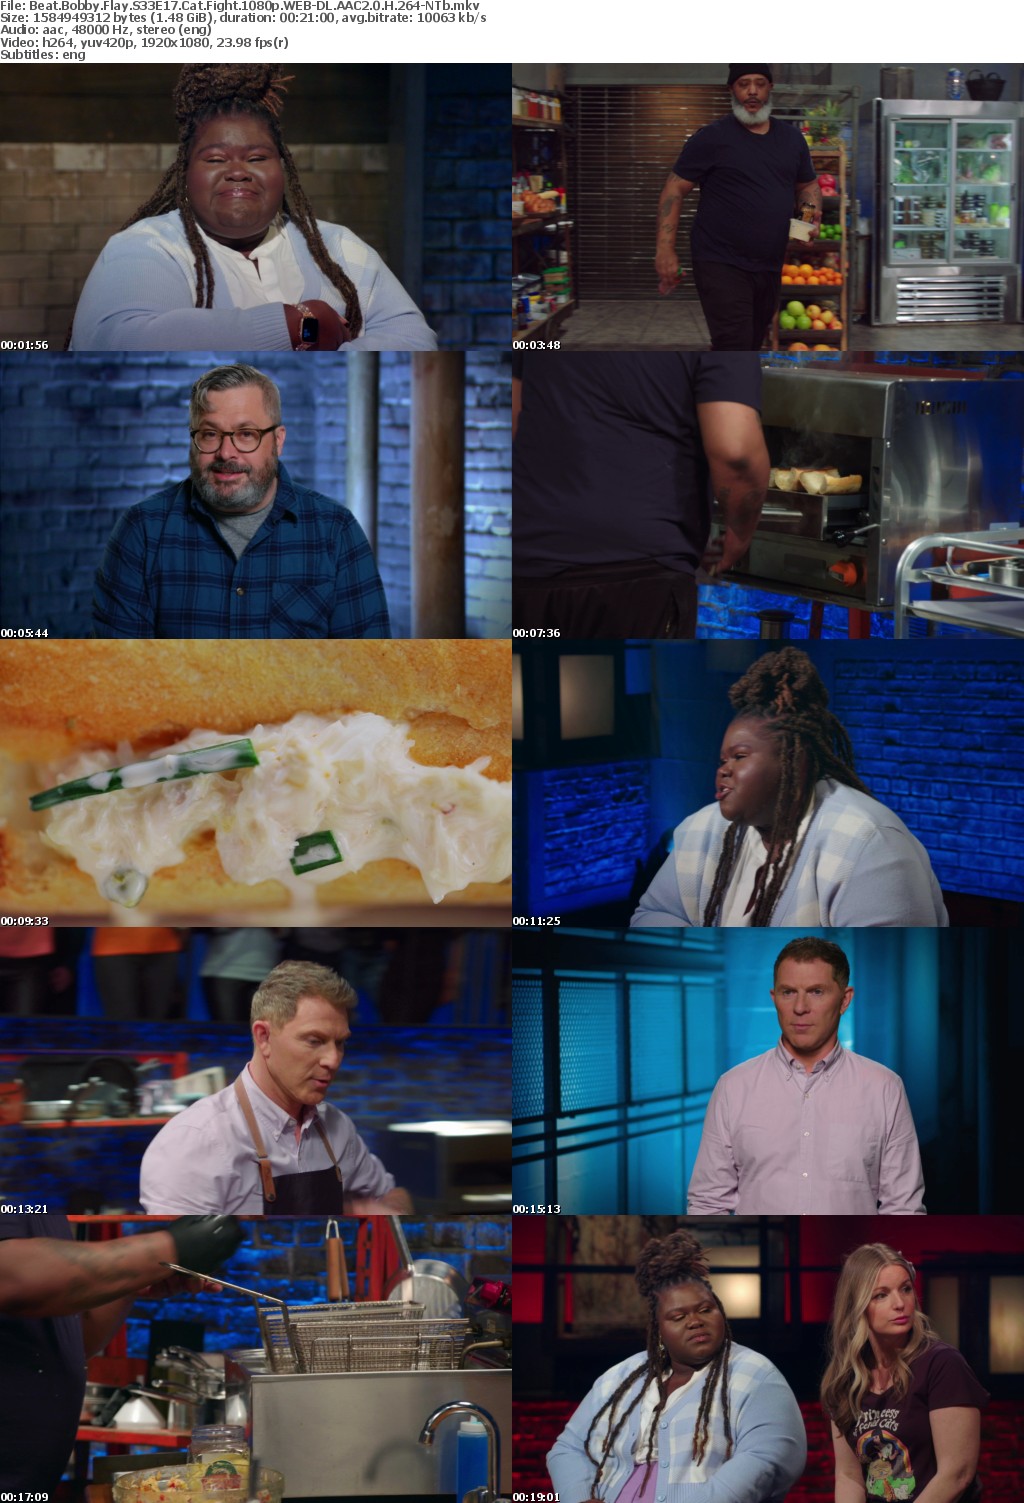 Beat Bobby Flay S33E17 Cat Fight 1080p WEB-DL AAC2 0 H 264-NTb